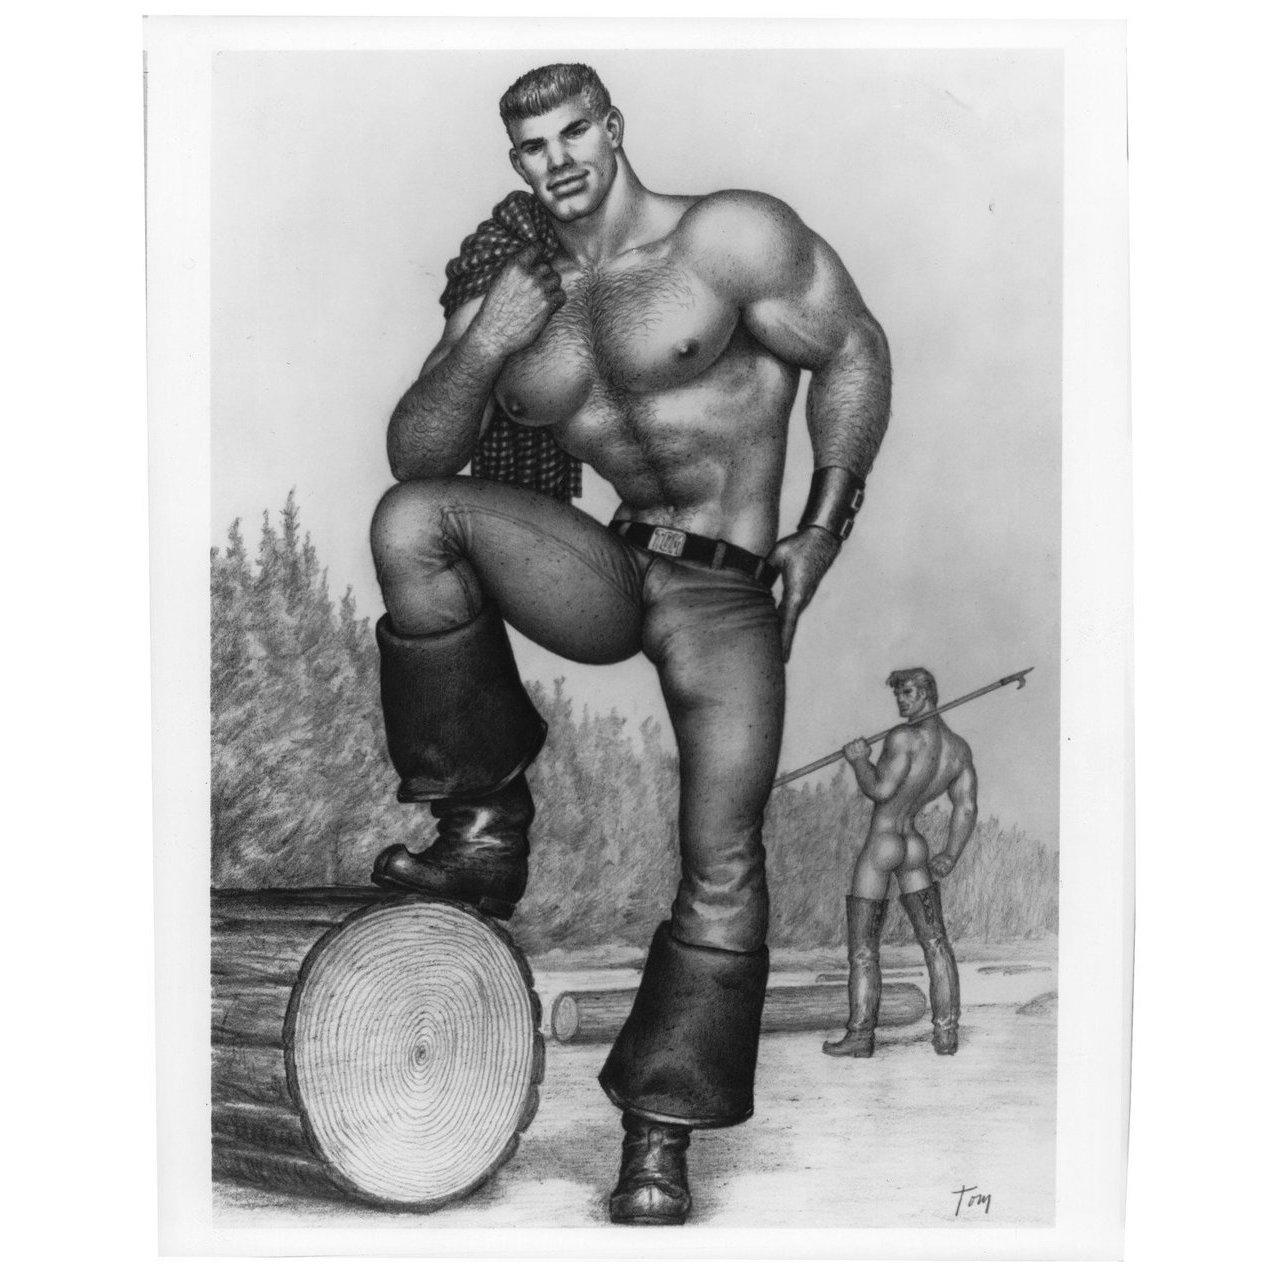 Original 1992 US silver gelatin single-weight photo for the documentary film Daddy and the Muscle Academy directed by Ilppo Pohjola with Tom of Finland. Very good-fine condition, slight trim. Please note: the size is stated in inches and the actual